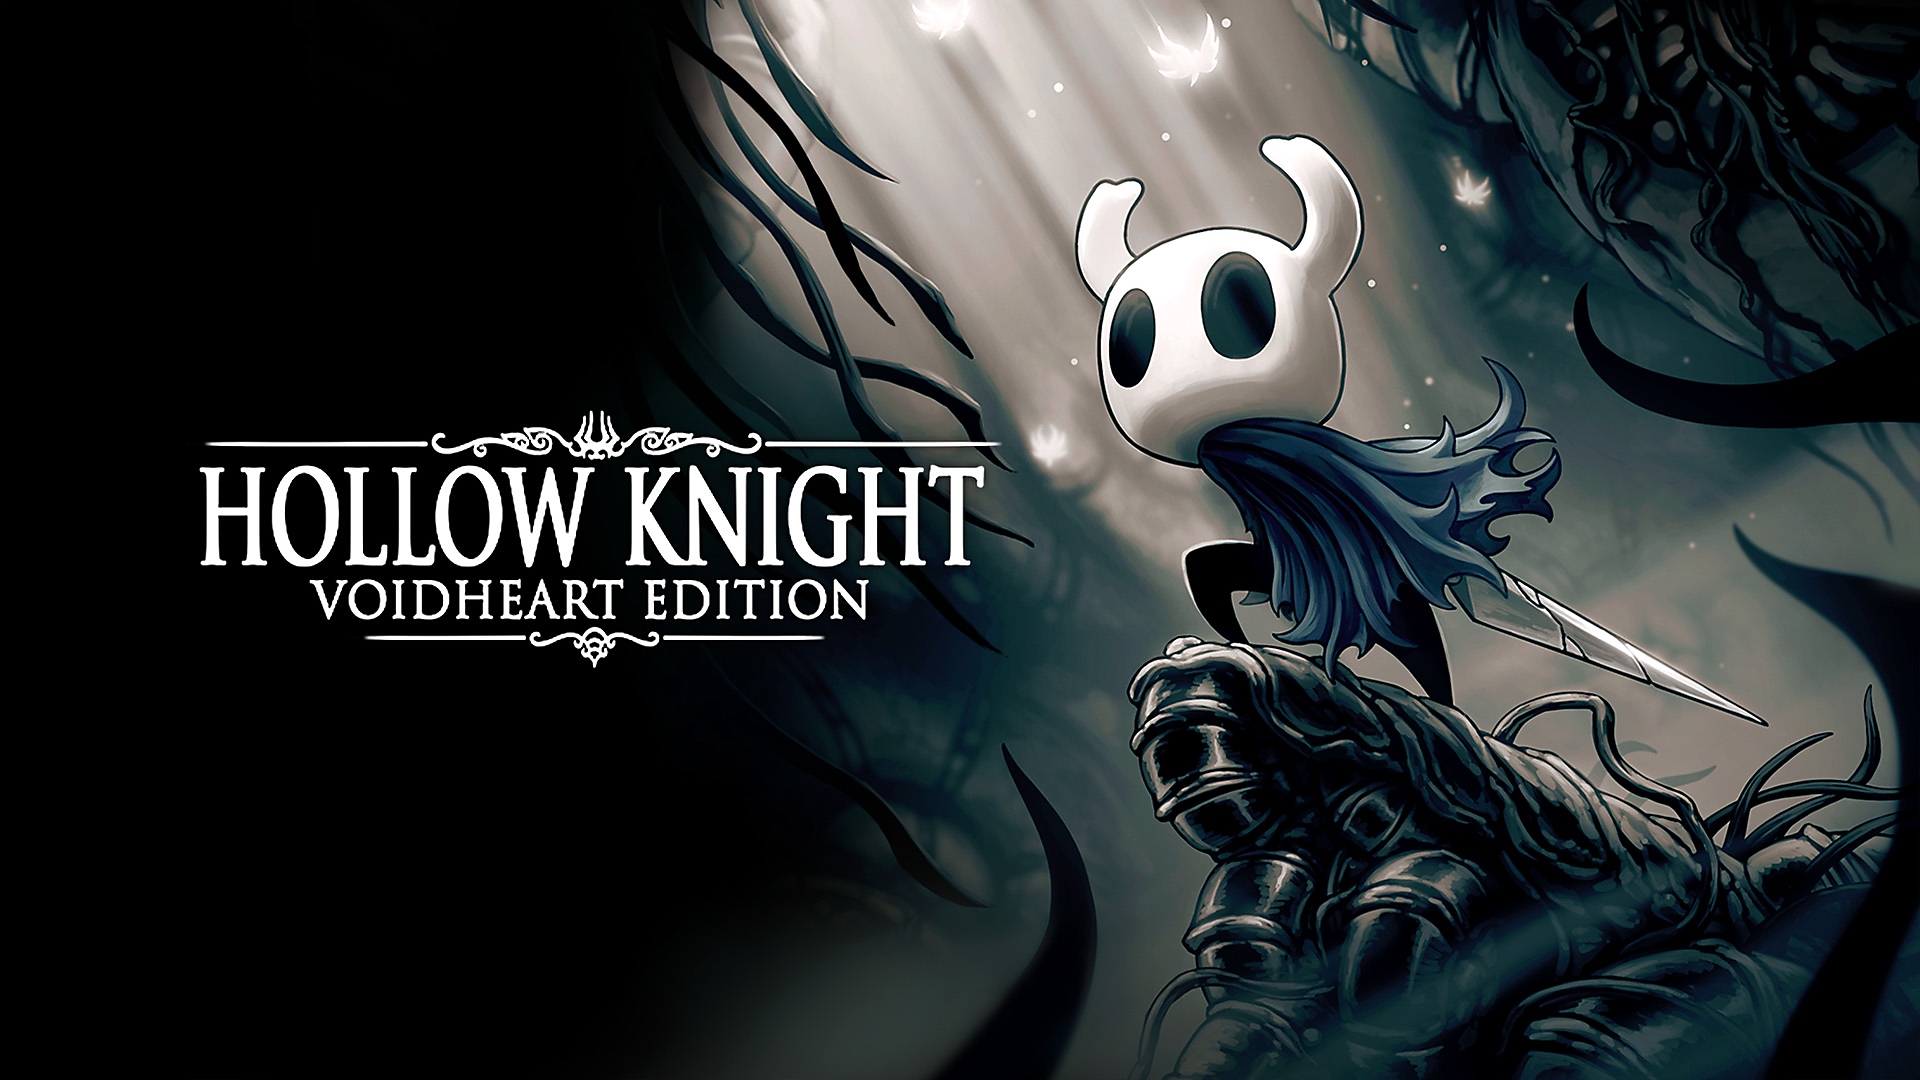 Hollow Knight: Voidheart Edition - Announce and Gameplay Trailer | PS4